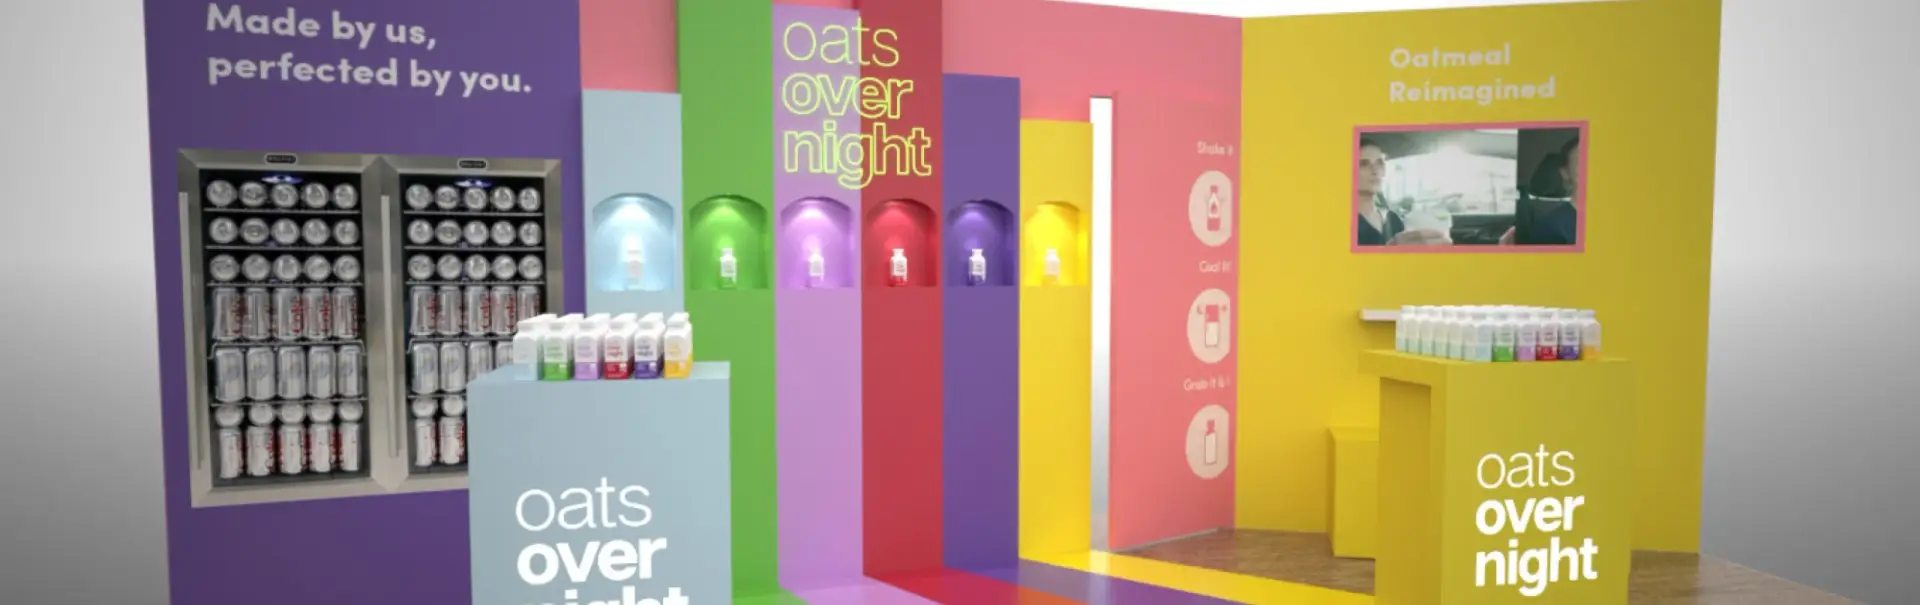 Colorful Oats Overnight trade show booth designed by Highway 85 Creative featuring product displays and sampling stations